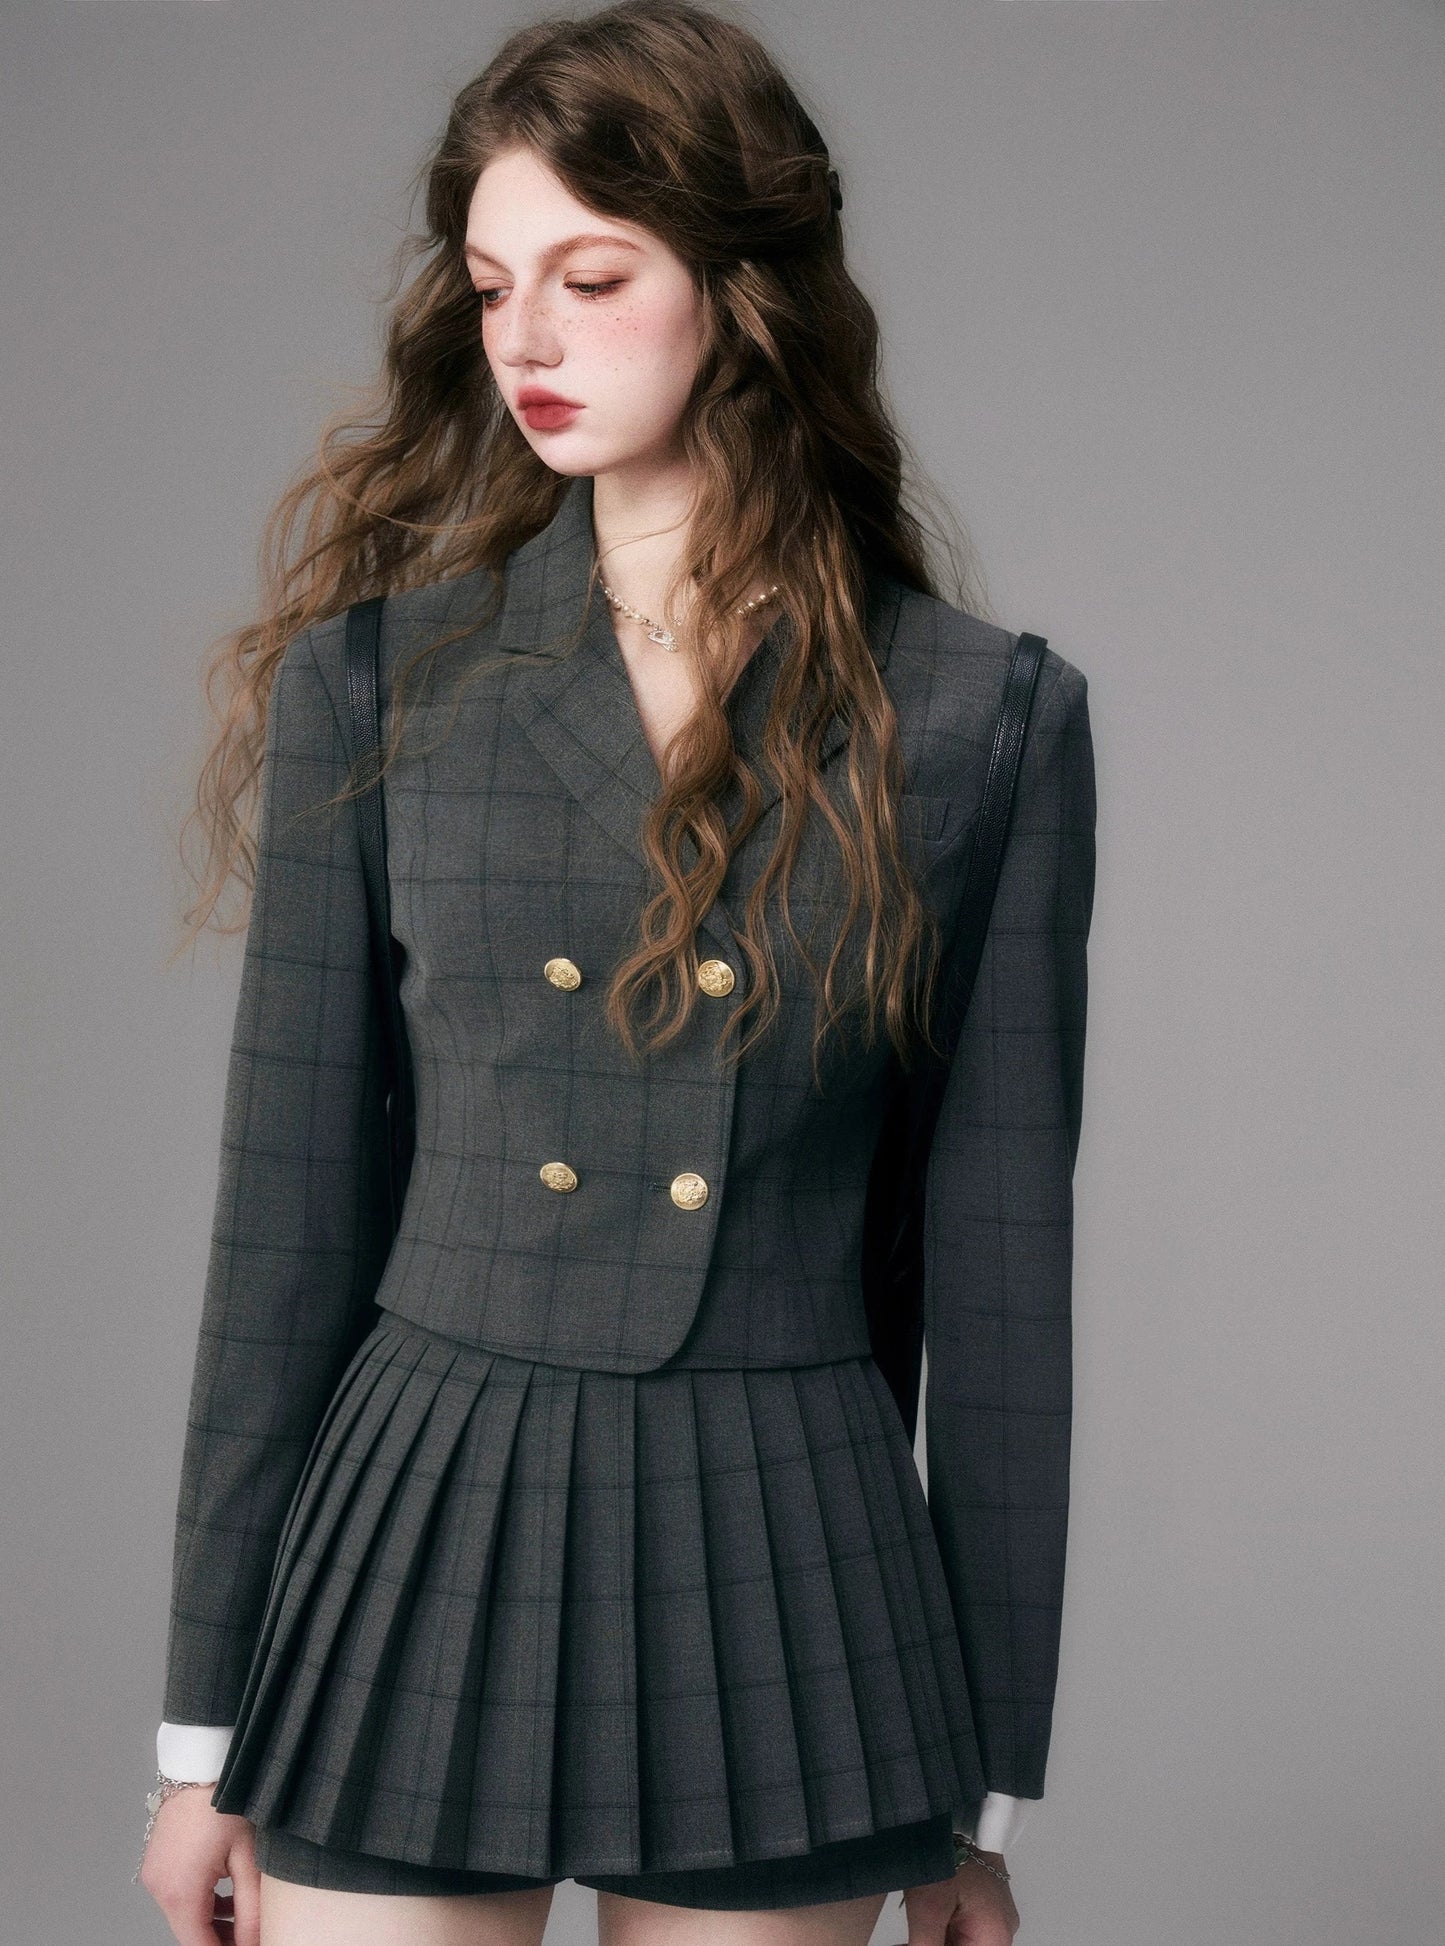 British pleated skirt two-piece jacket suit